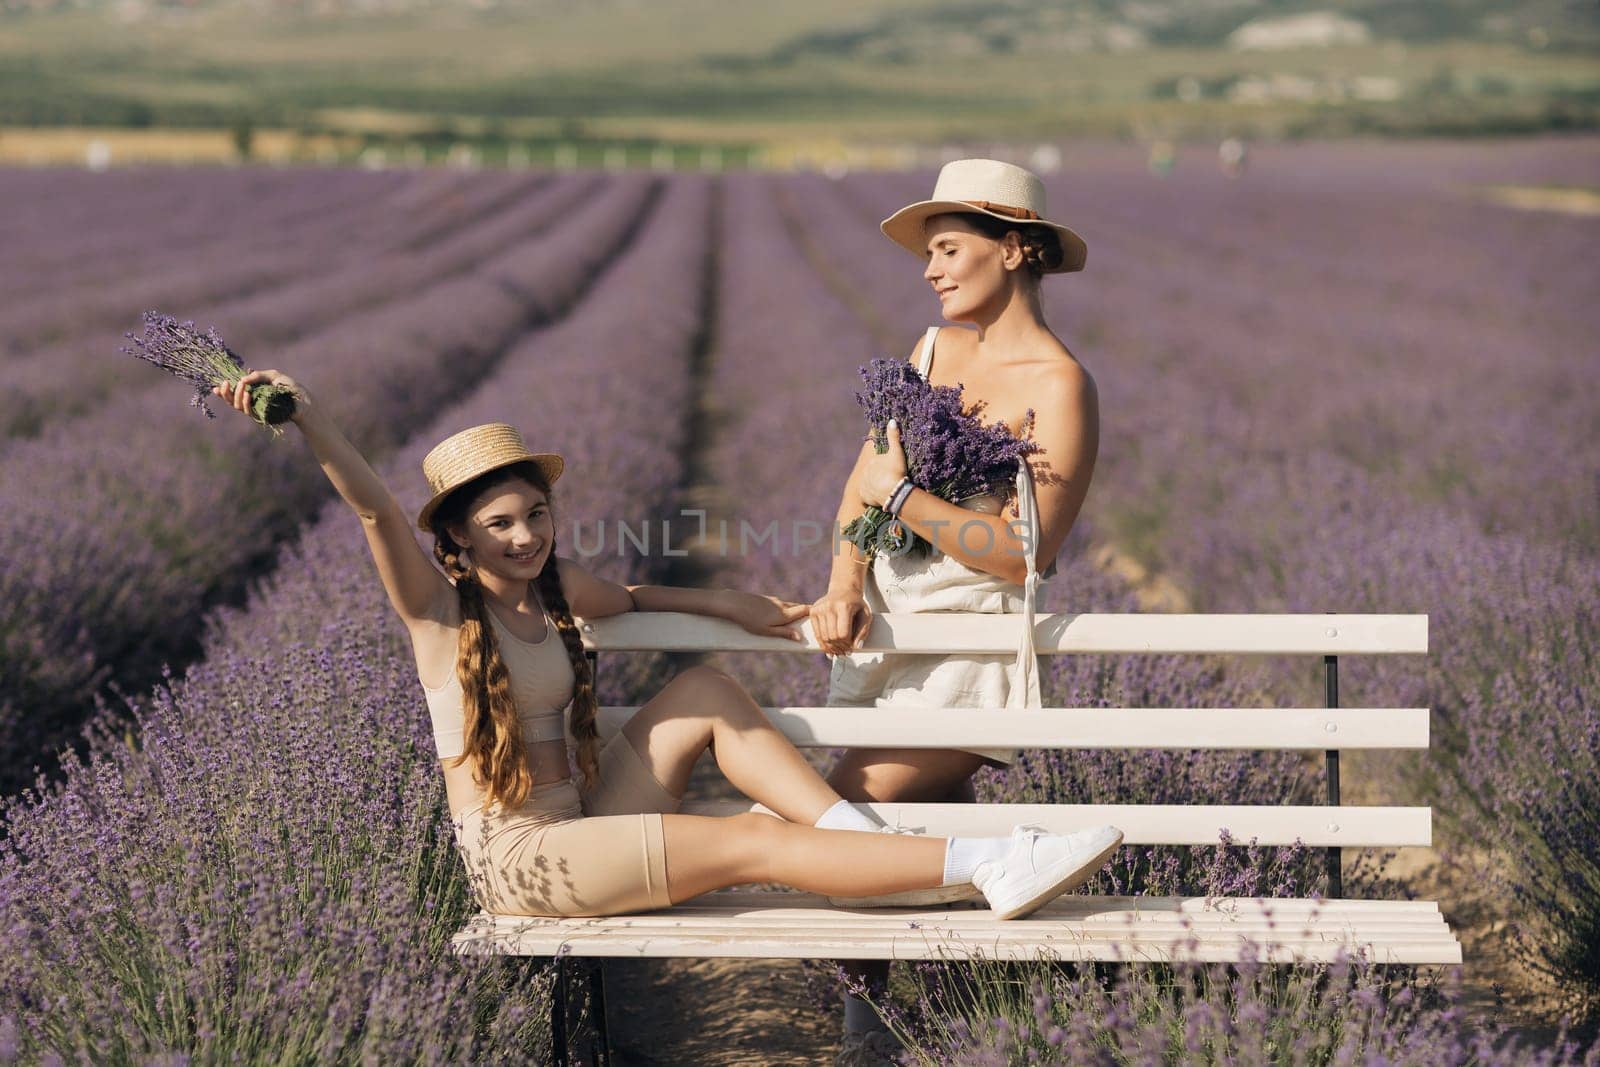 woman child sitting bench in field lavender. The woman is holding a bouquet of flowers, and the child is holding a bouquet as well. The scene is peaceful and serene